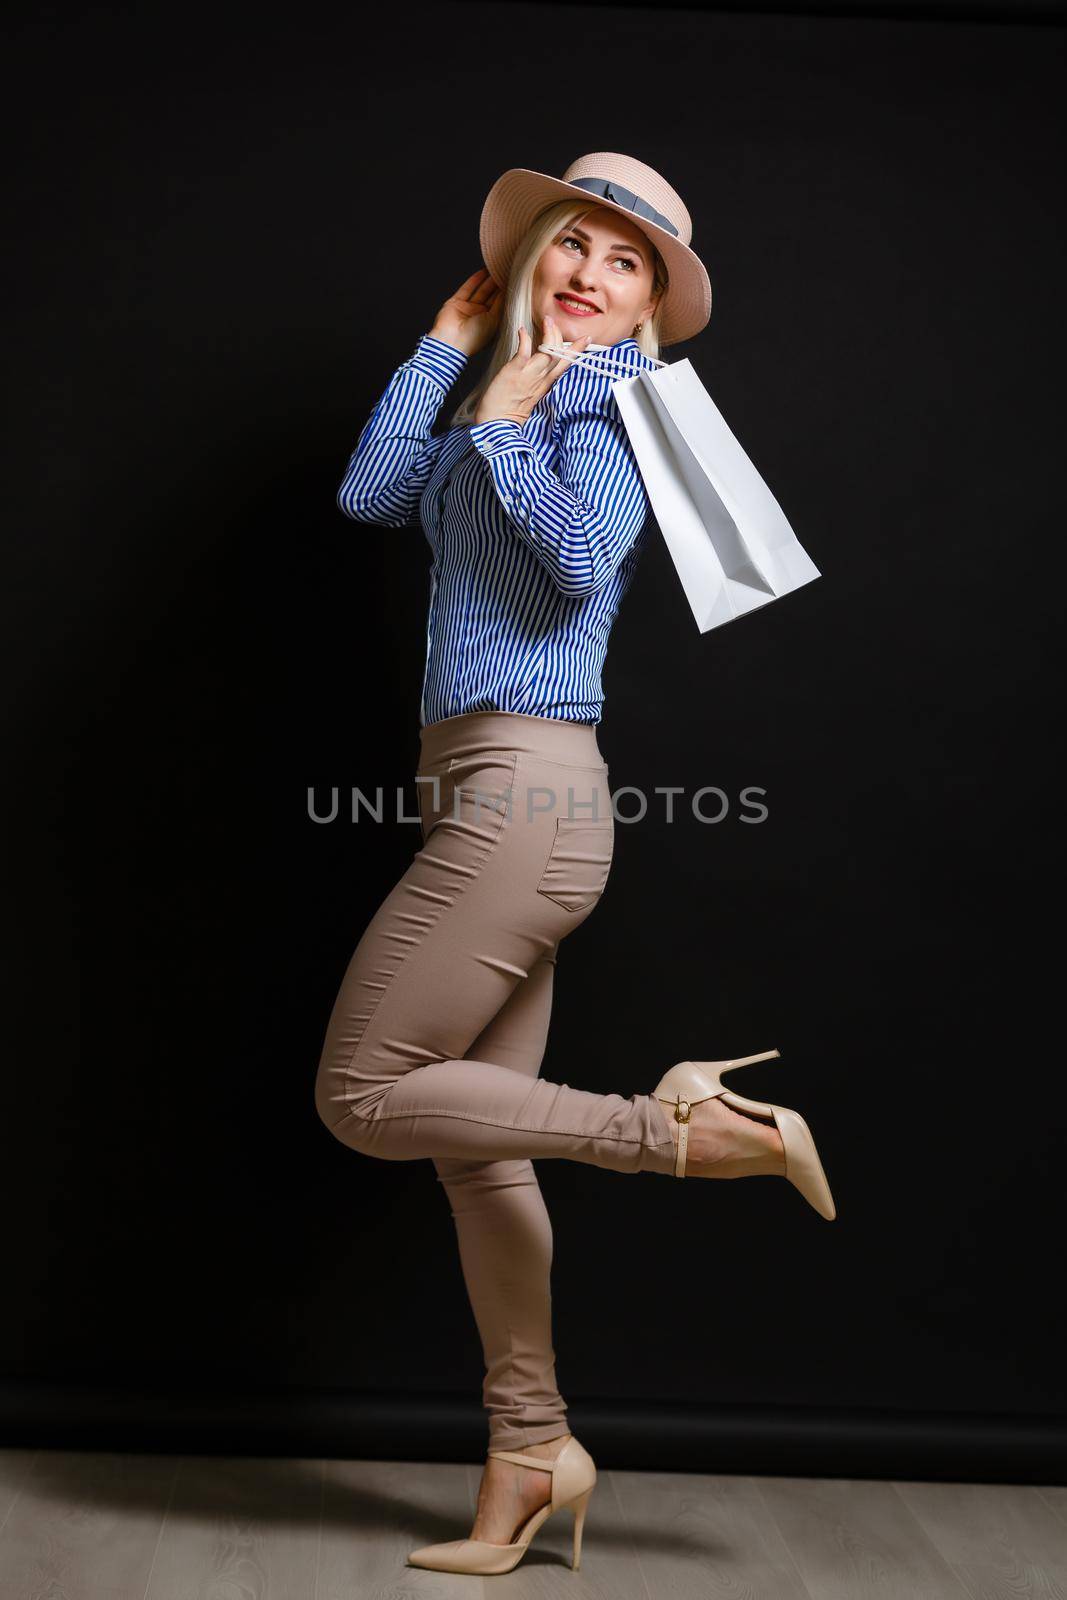 Elegant woman holding shopping bags, black friday concept